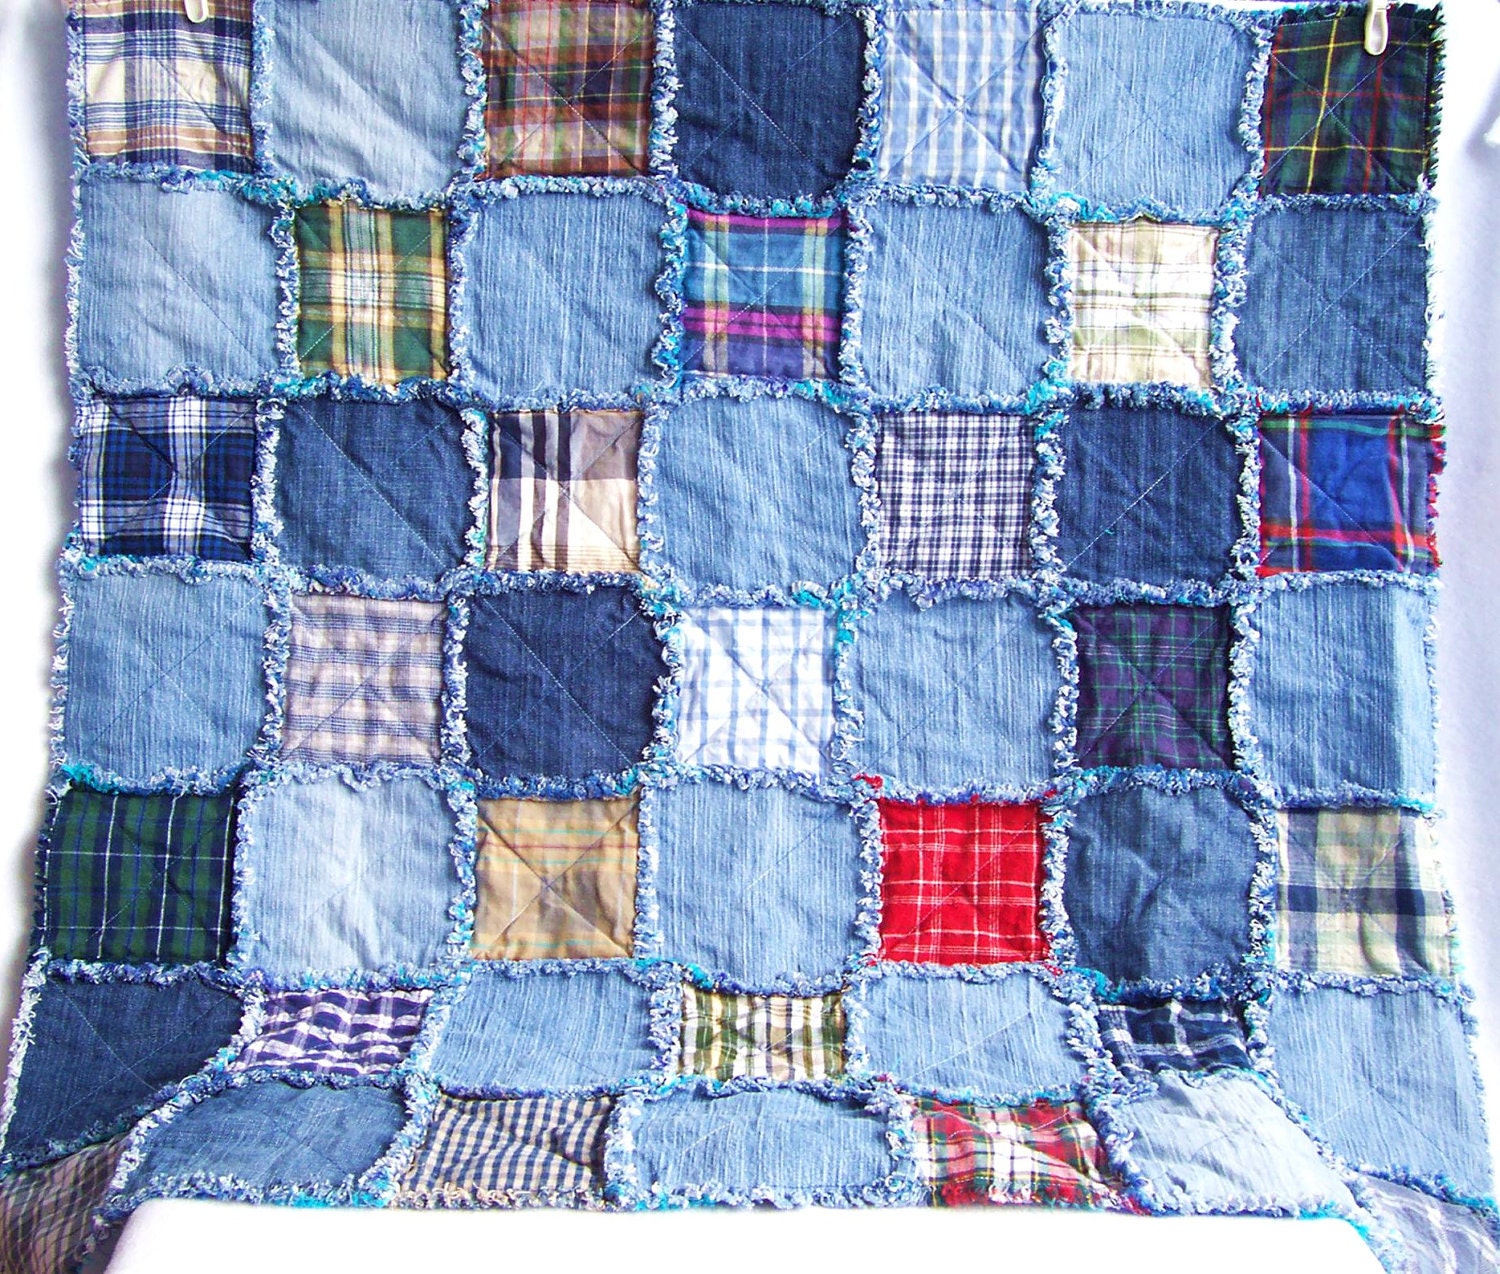 Upcycled Recycled Blue Jean Denim Quilt  Denim quilt patterns, Quilts,  Picnic quilt